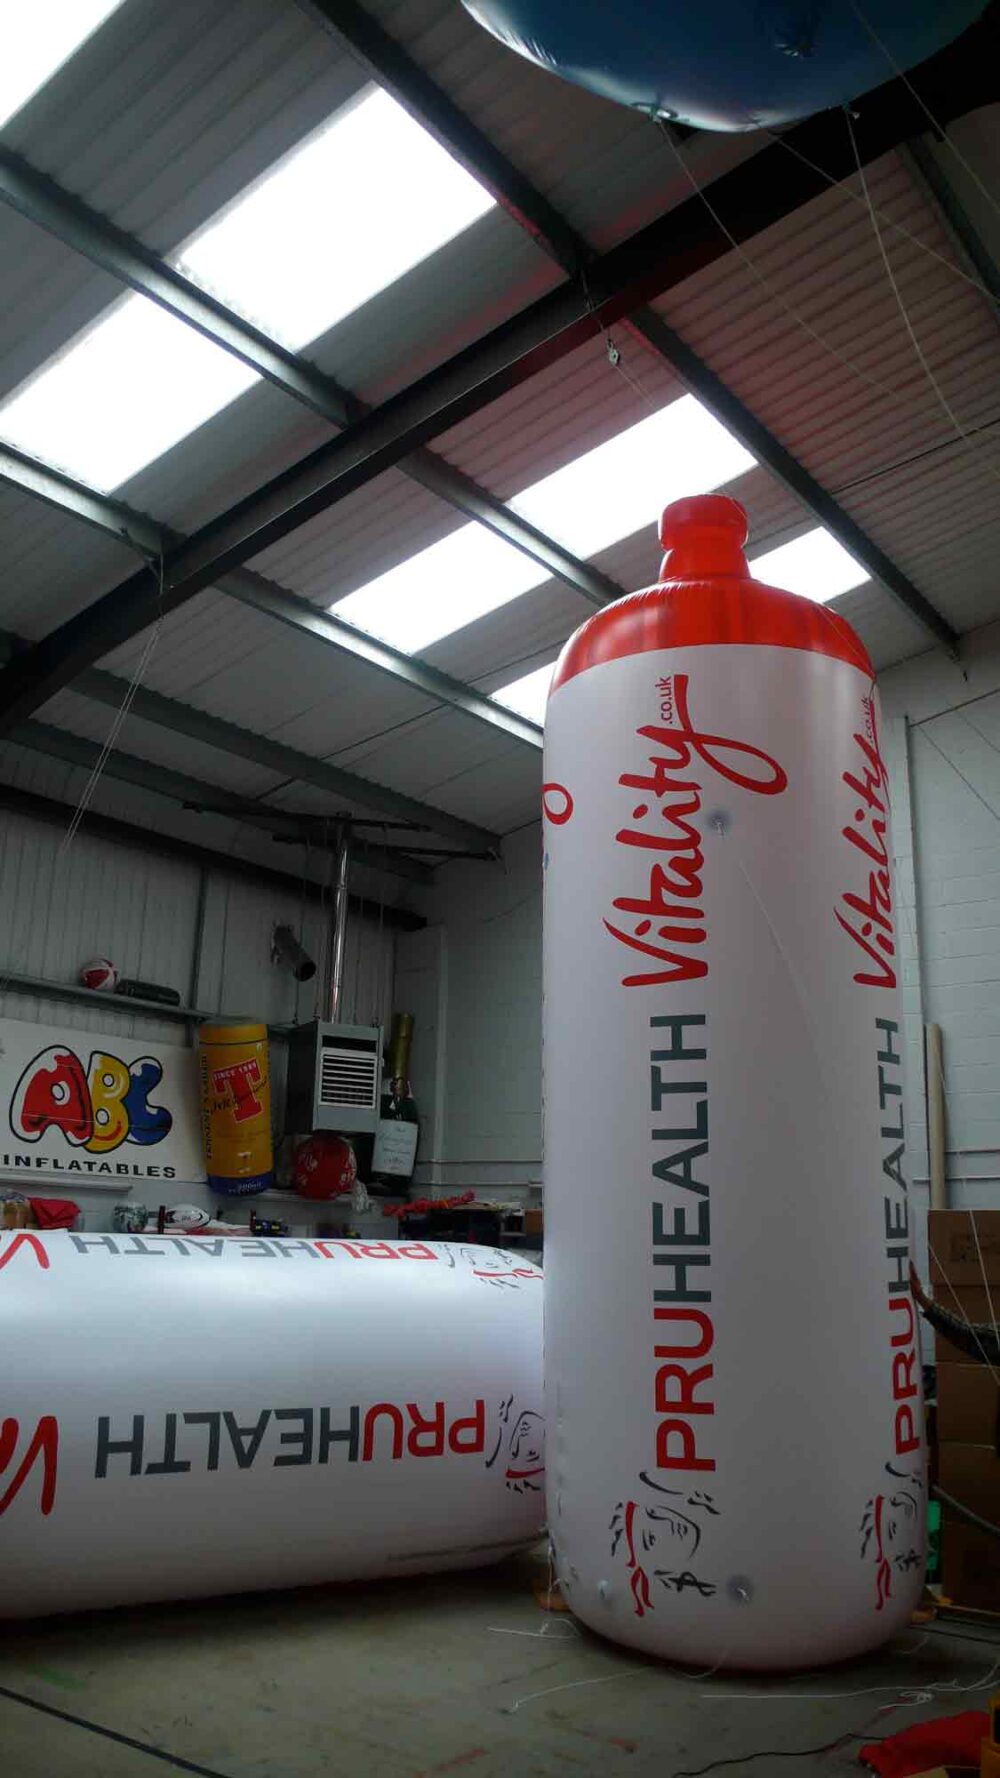 2 giant inflatable replica water bottles branded PruHealth